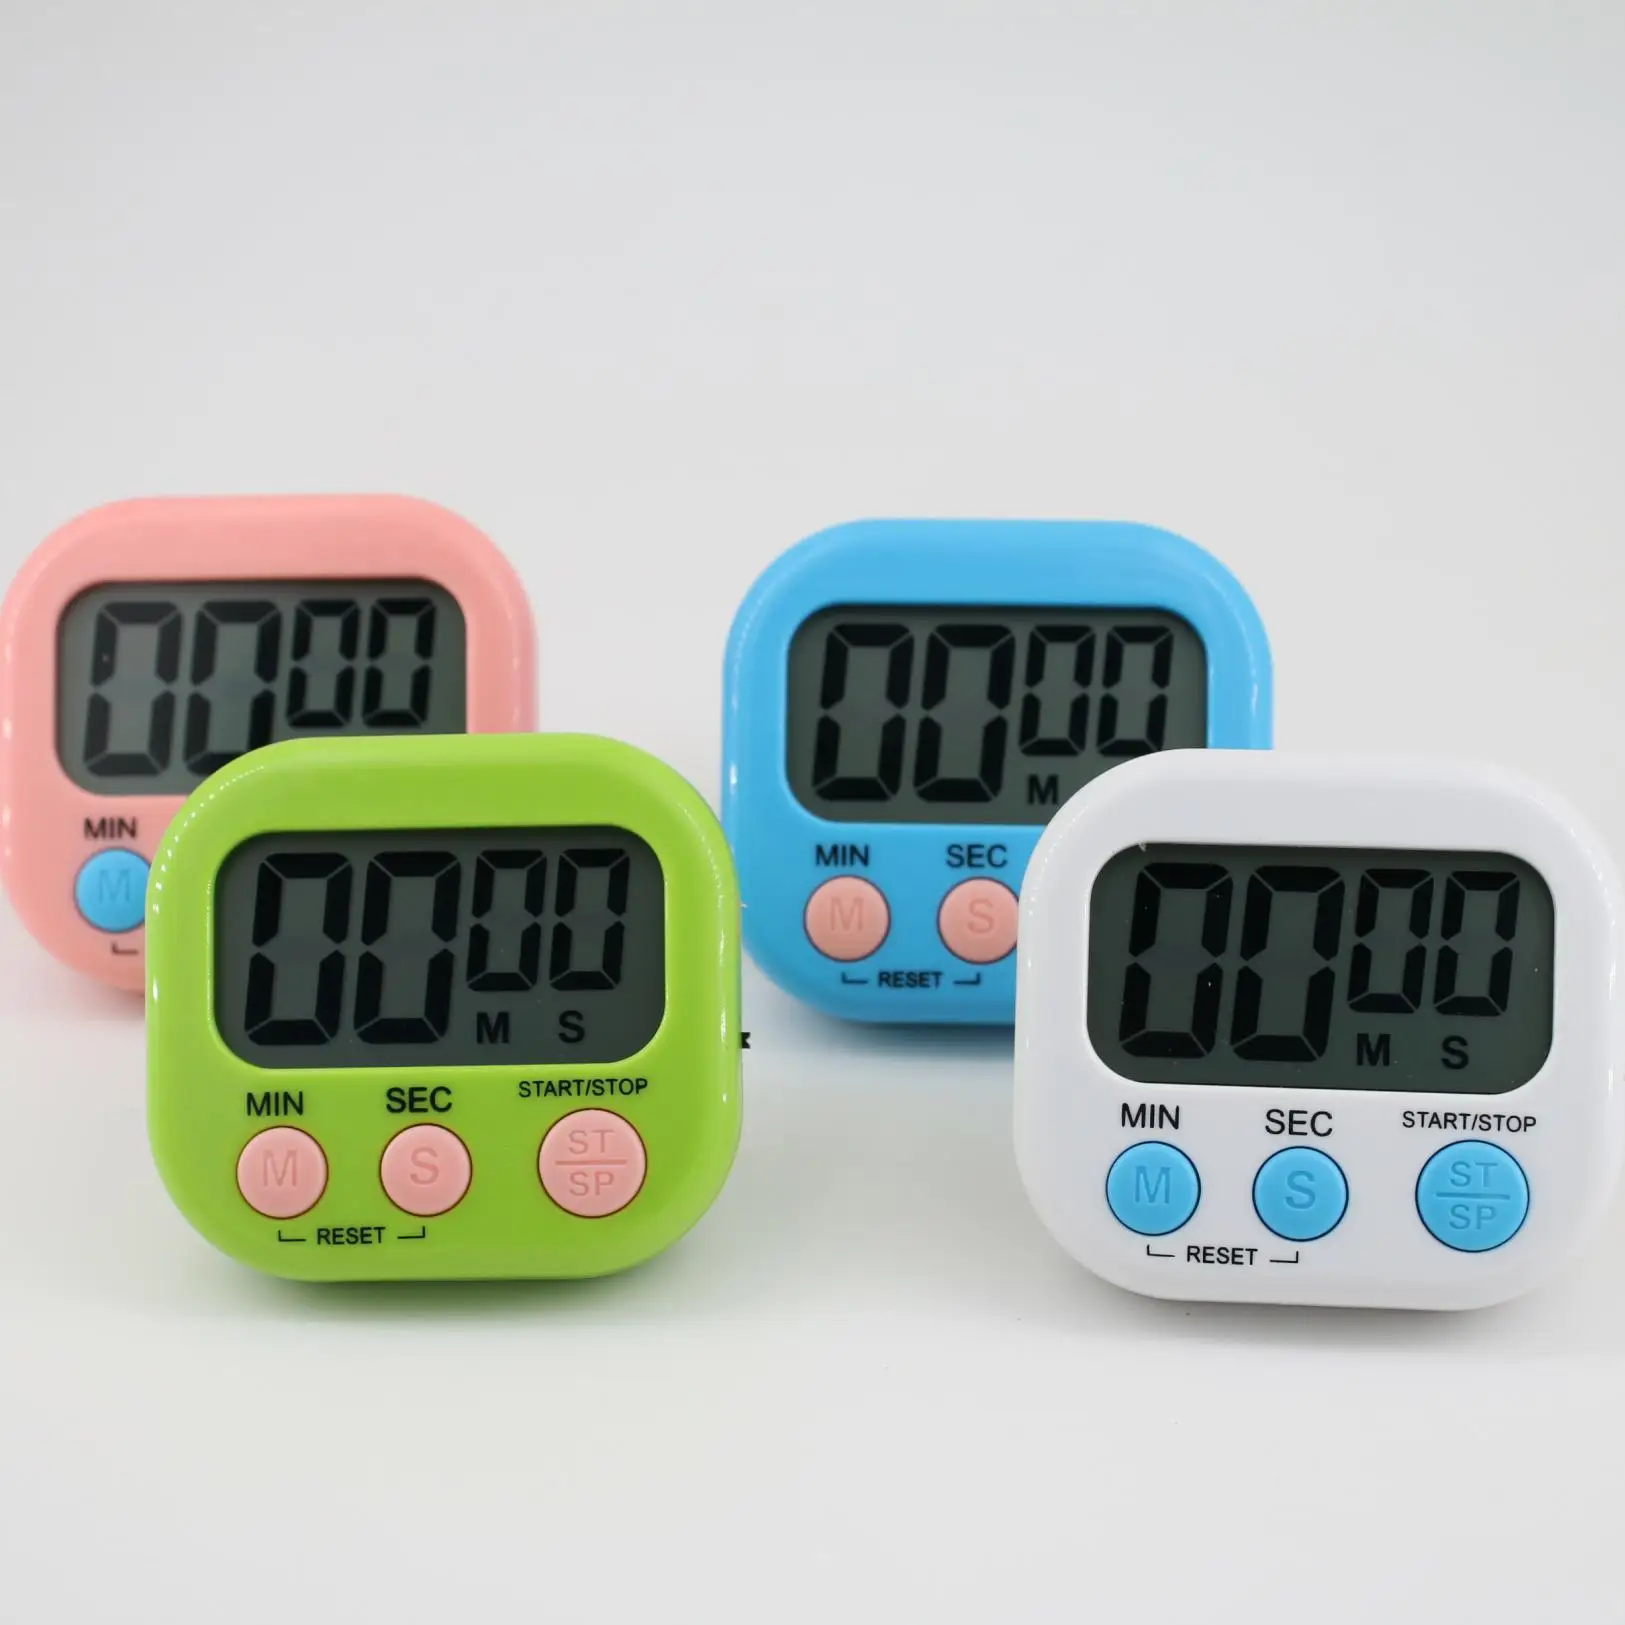 https://ae01.alicdn.com/kf/S0d0235c4760a4830aefd293bd5f2bb7fO/Kitchen-Timer-Magnetic-LCD-Digital-Countdown-Stopwatch-With-Stand-Practical-Cooking-Baking-Sports-Alarm-Clock-Reminder.jpg